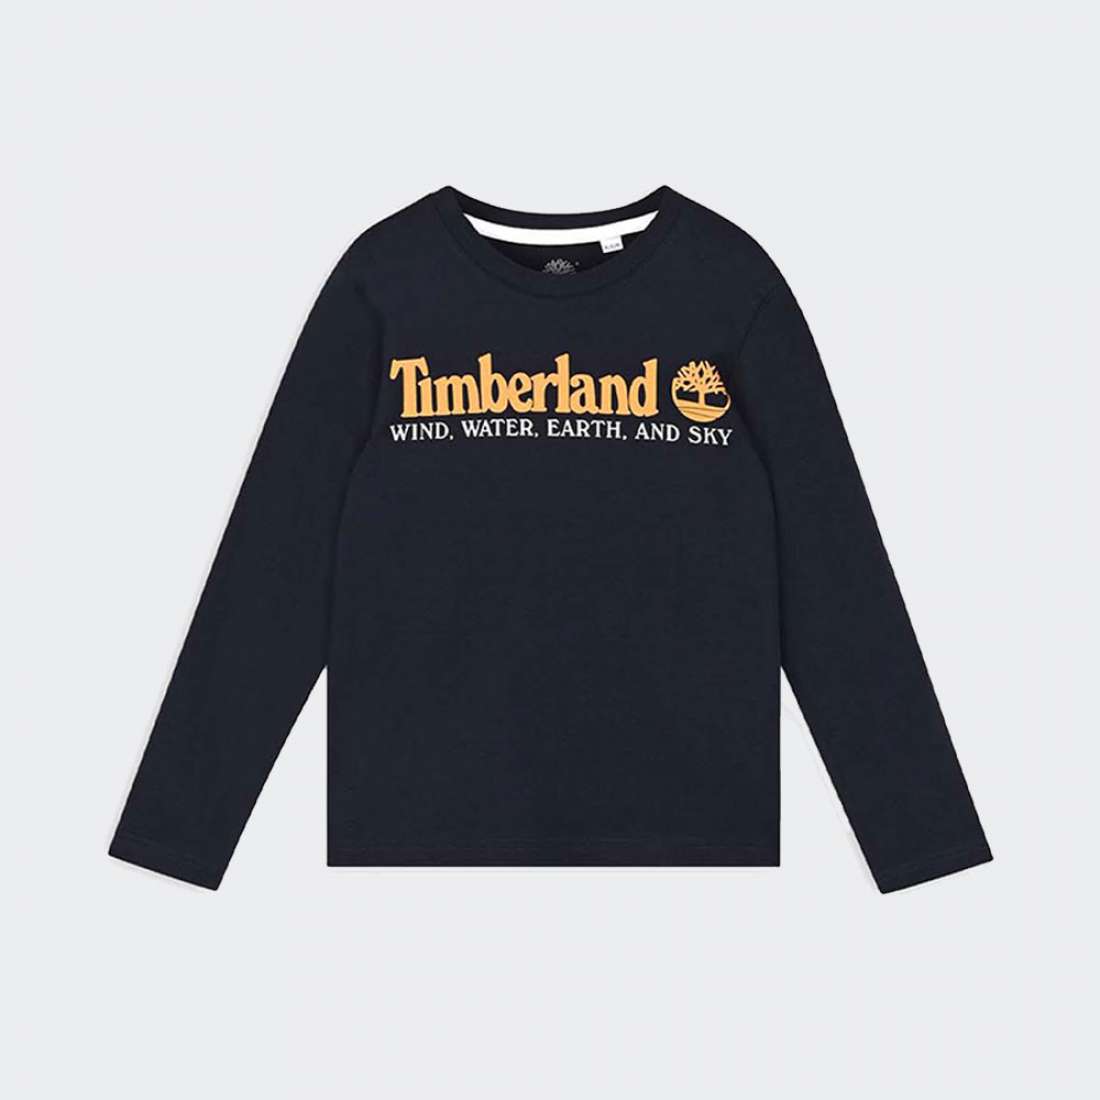 LONGSLEEVE TIMBERLAND Y WIND, WATER, EARTH AND SKY NAVY BLUE